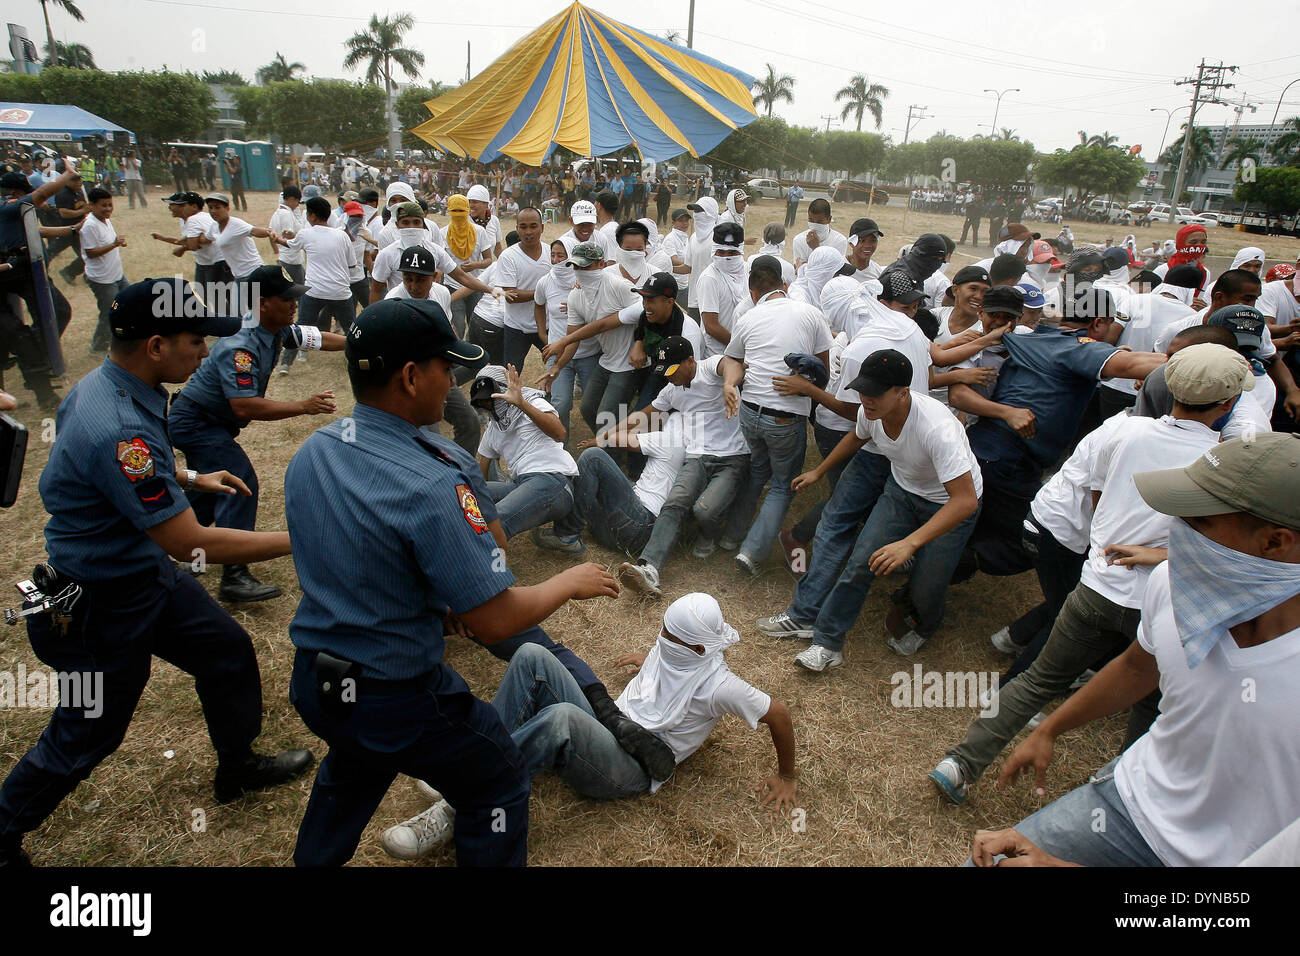 Pasay City, April 23. 28th Apr, 2014. Mock activists scuffle with policemen during the Philippine National Police Civil Disturbance Management (PNP-CDM) competition in Pasay City, the Philippines, April 23, 2014. The Philippine National Police (PNP) members prepare for the week-long protest rallies against the state visit of U.S. President Barack Obama from April 28, 2014. © Rouelle Umali/Xinhua/Alamy Live News Stock Photo